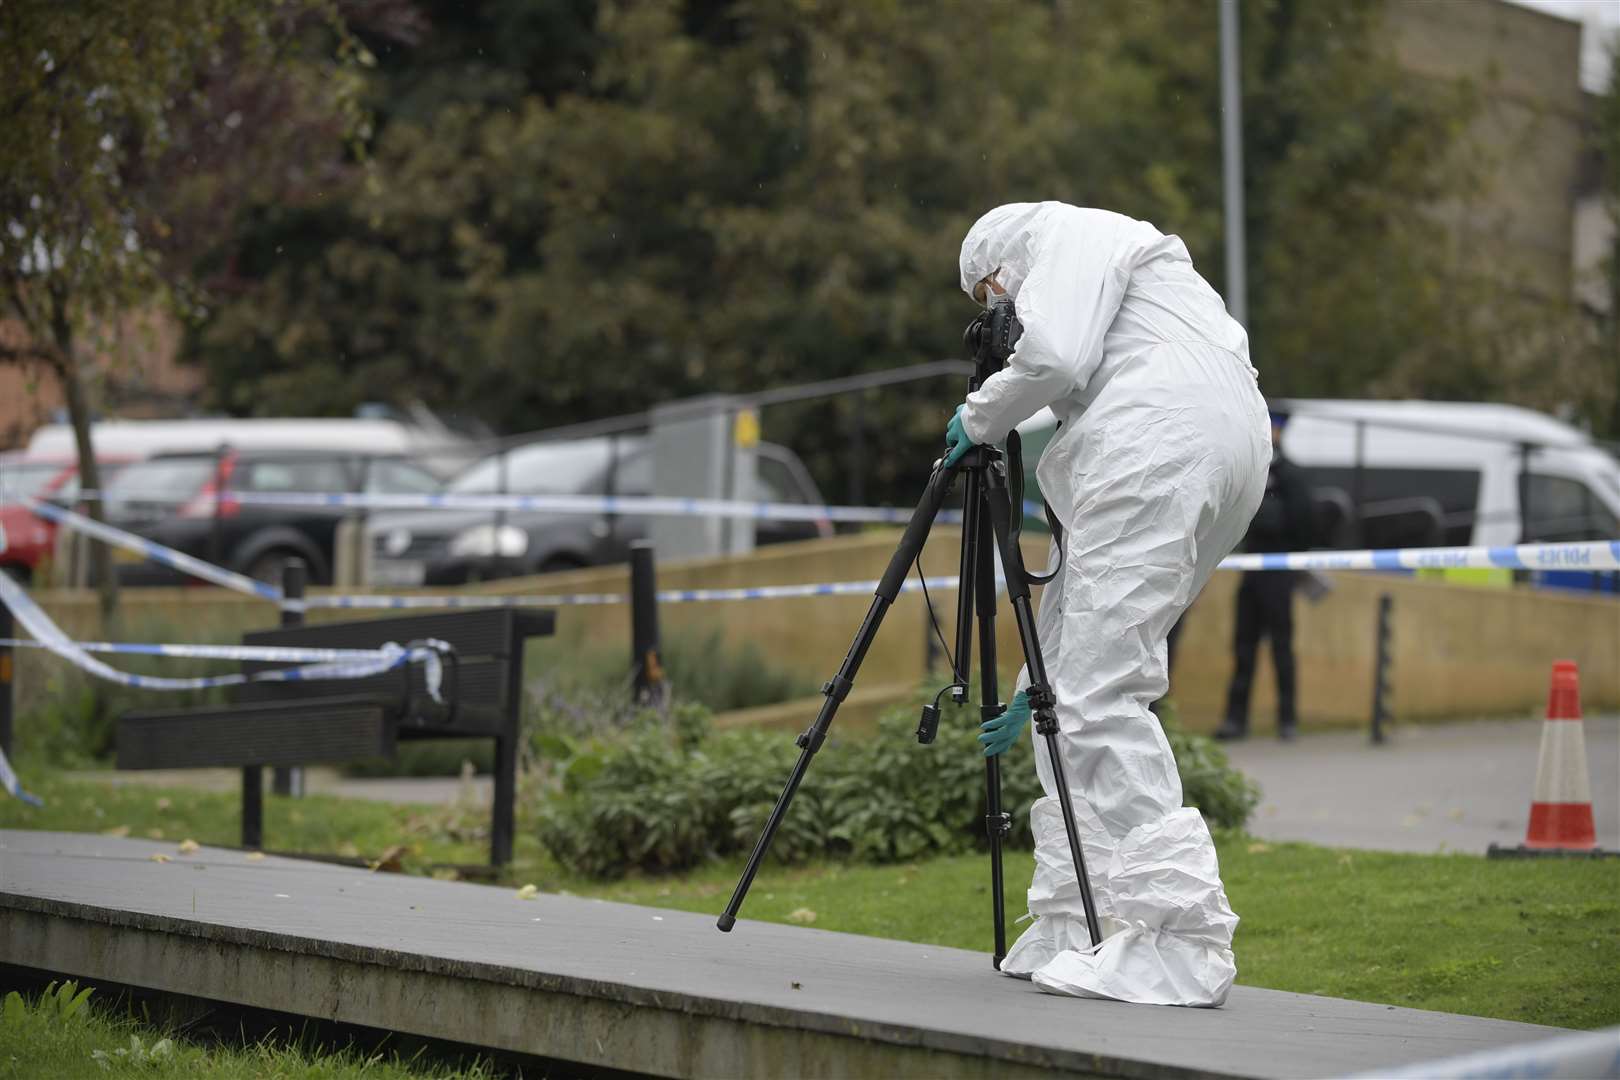 Forensic units were at the scene of the reported attack. Picture: Barry Goodwin